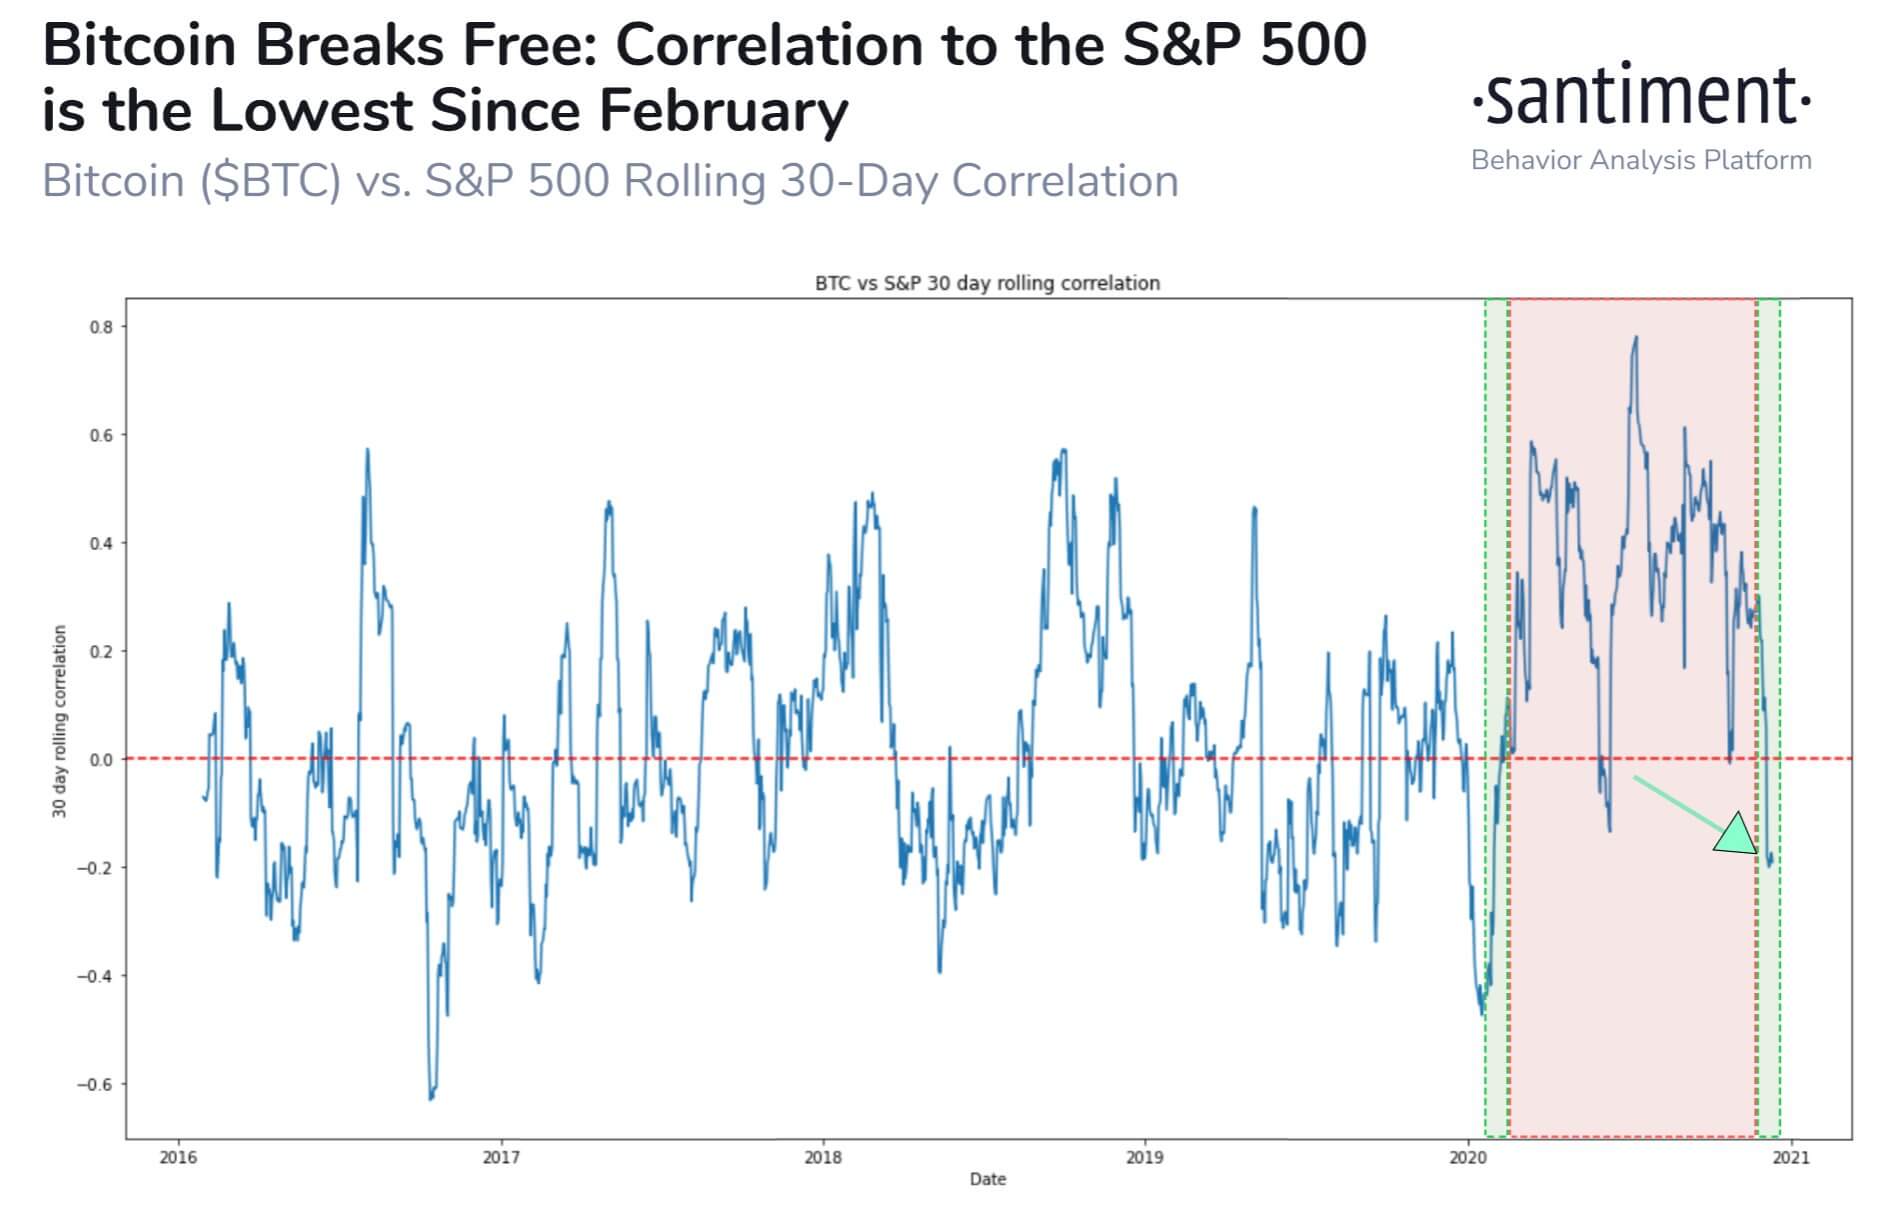 Correlation between Bitcoin and S&P 500 hits a 10-month low